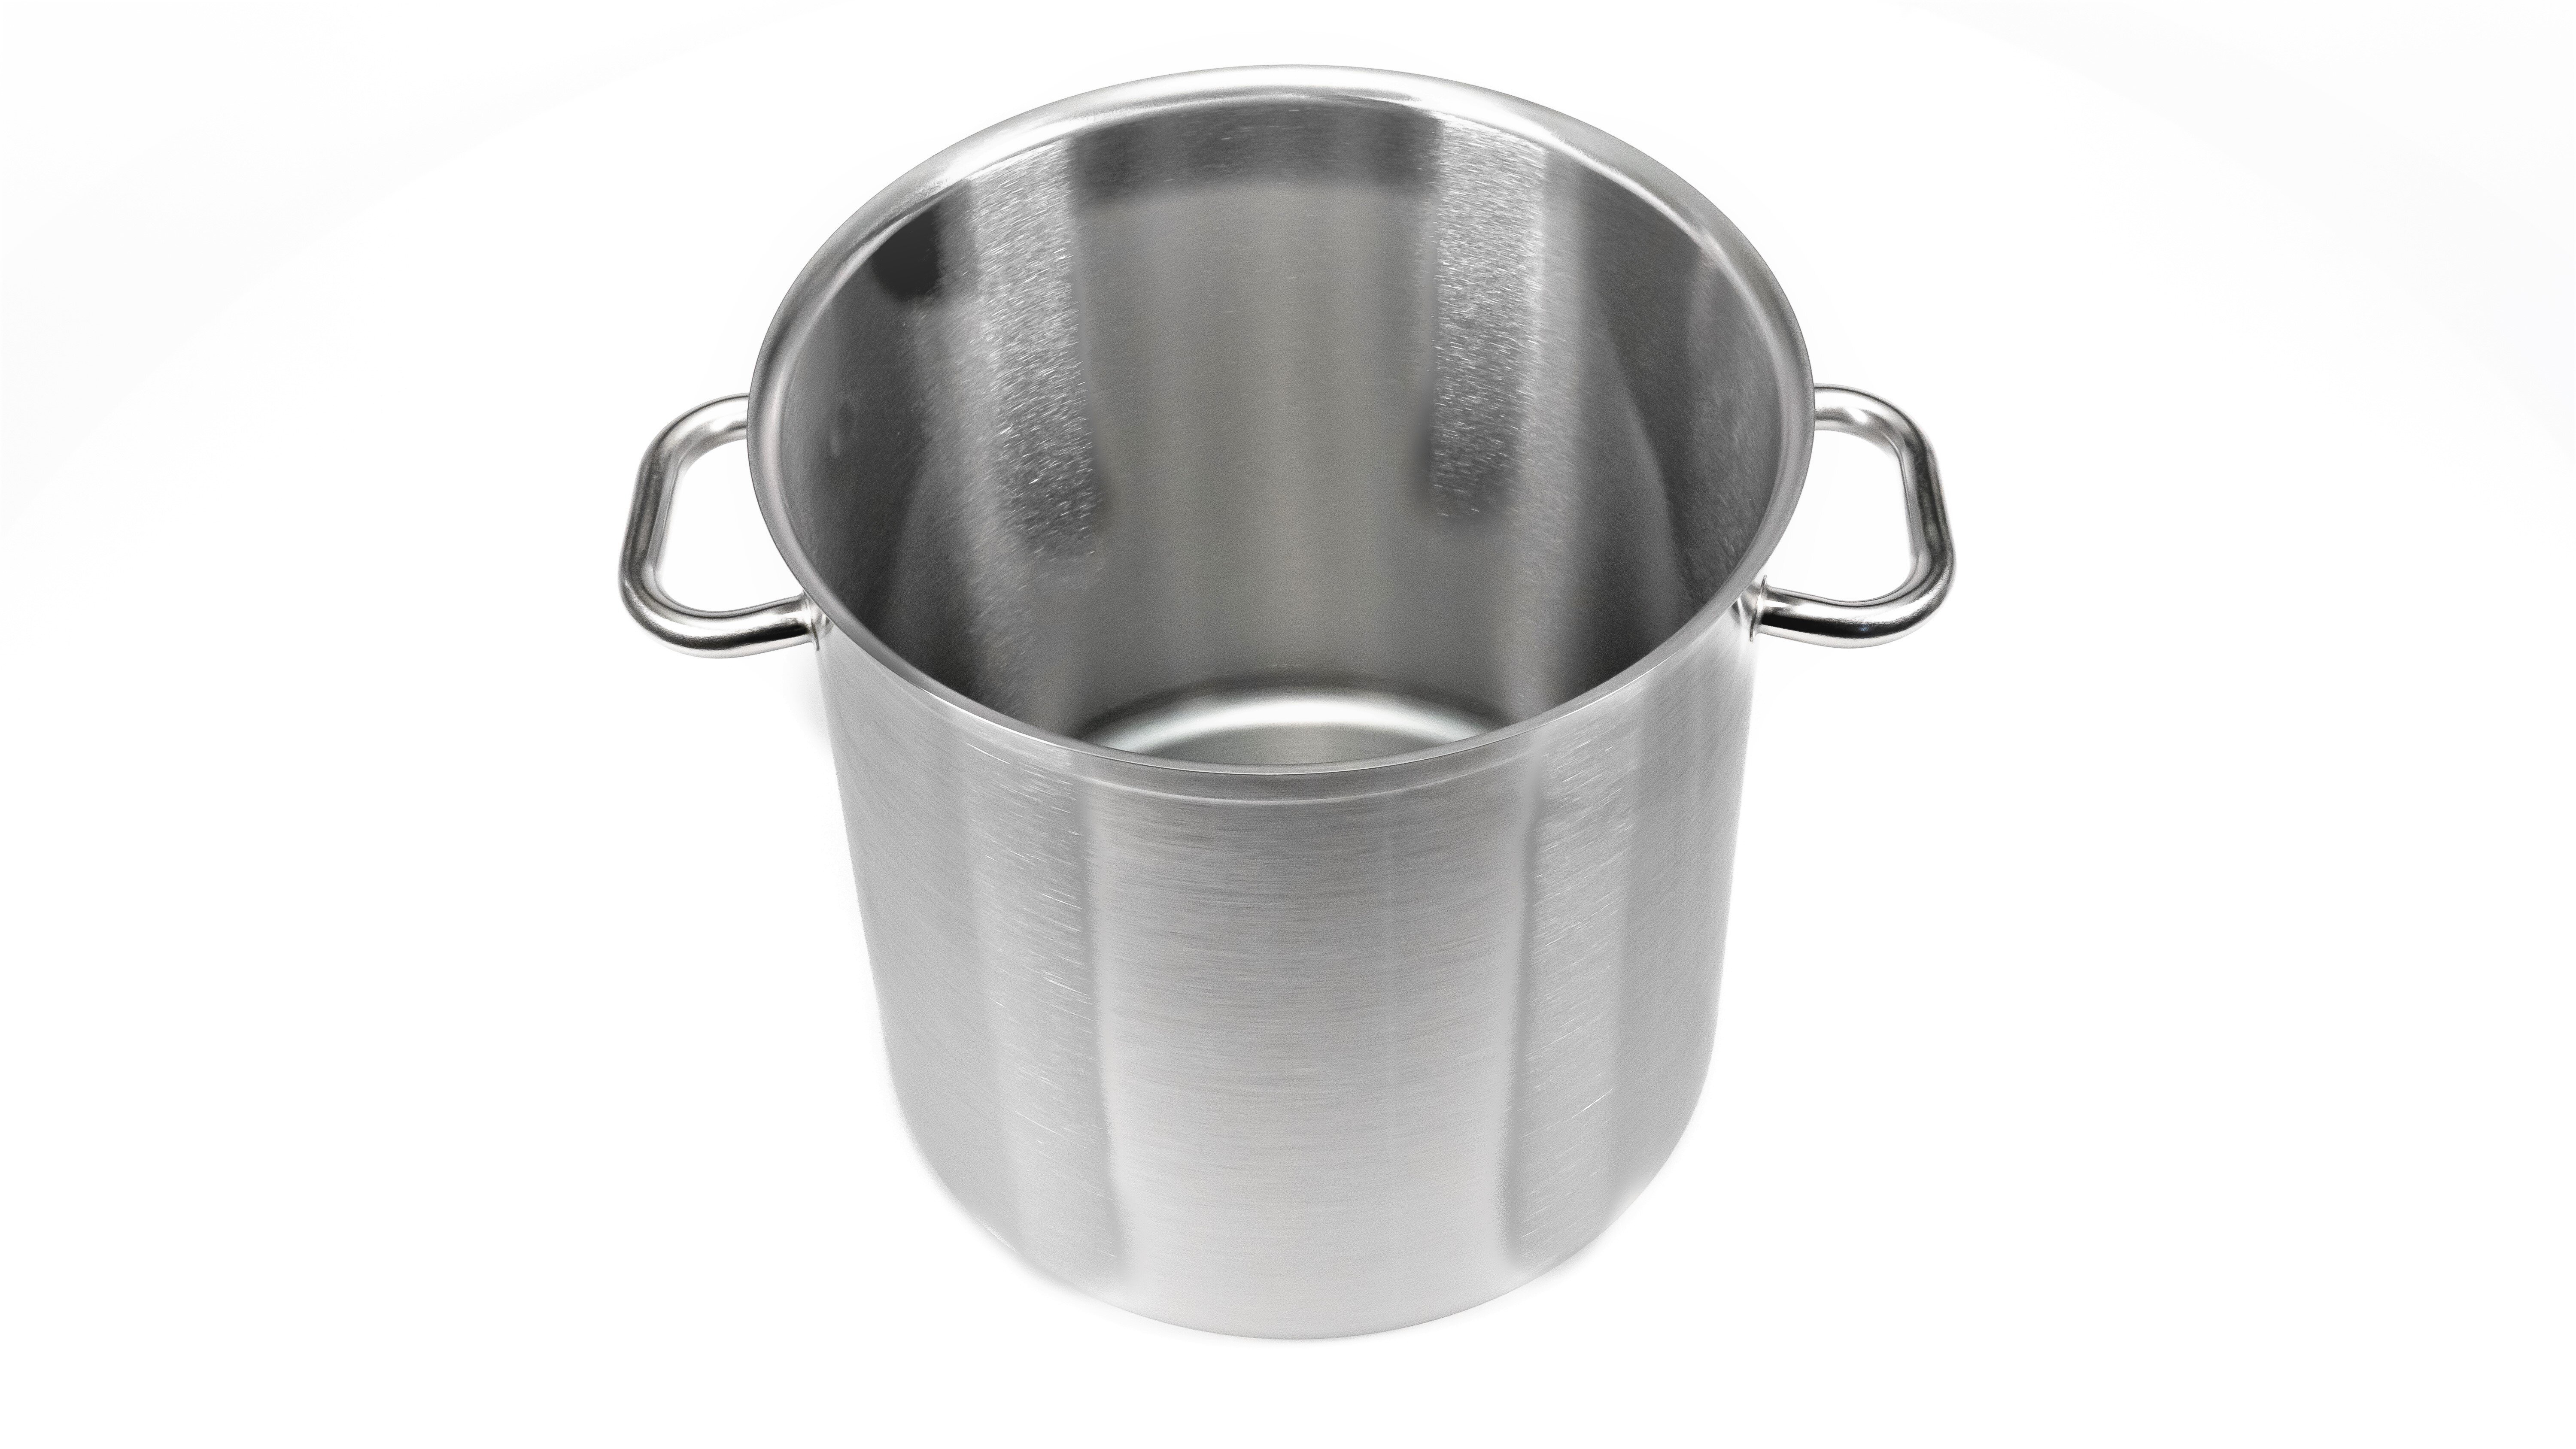 Concord Cookware Stock Pot with Lid Size: 60 qt